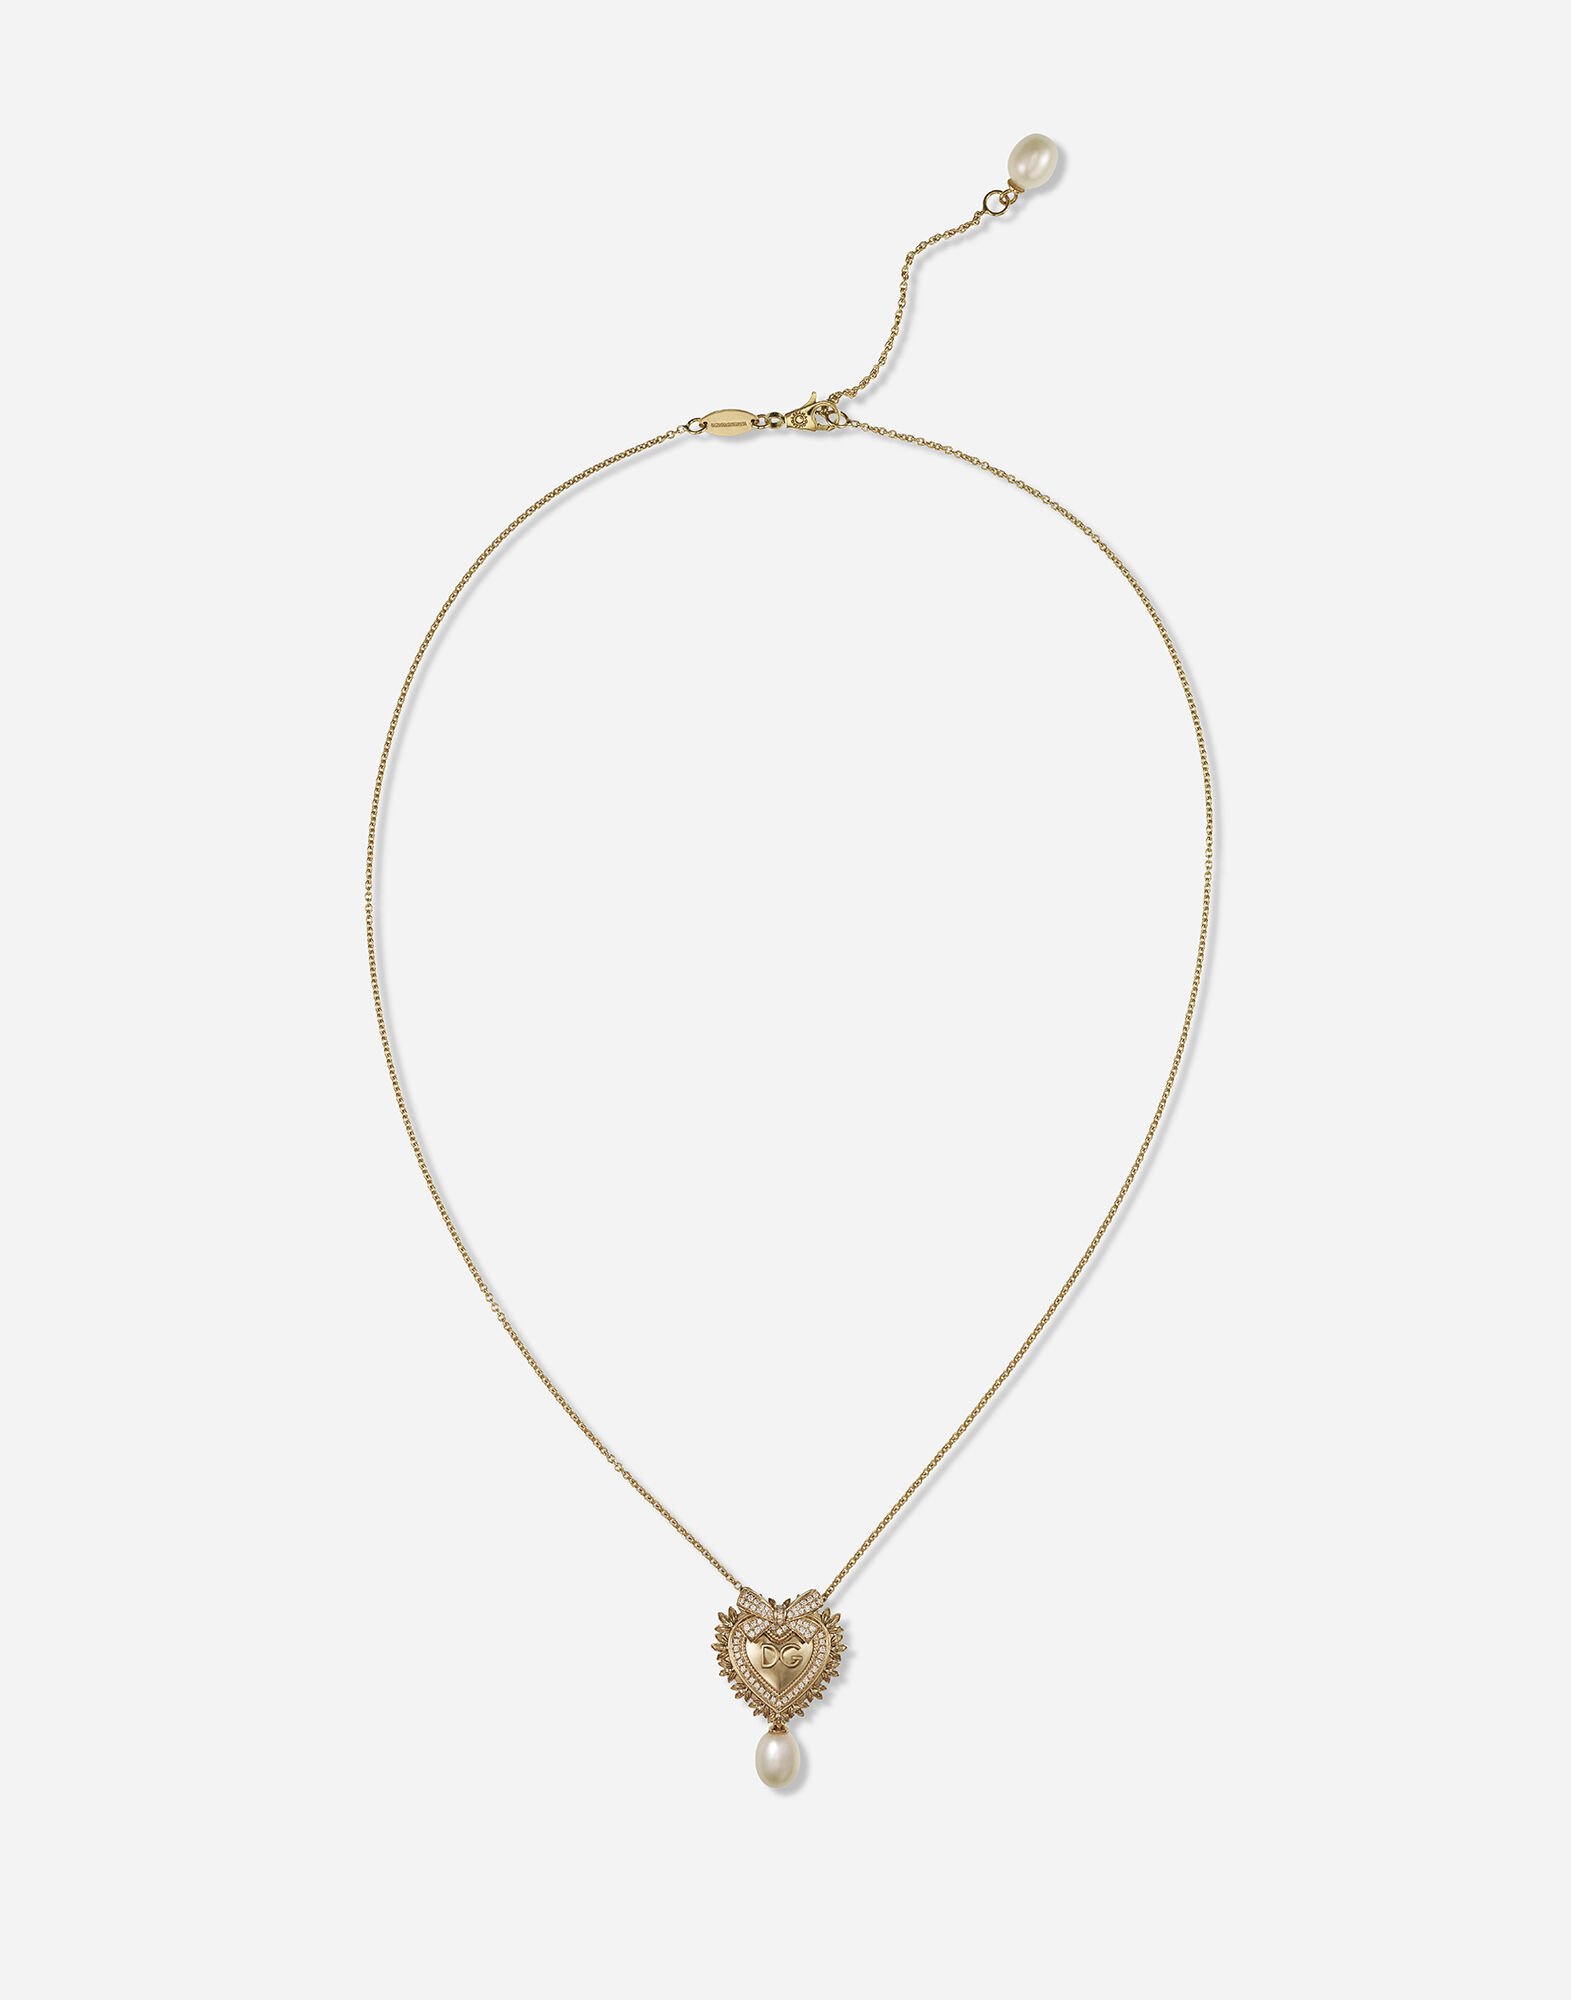 Dolce & Gabbana Devotion necklace in yellow gold with diamonds and pearls Gold WNP4L2W1111